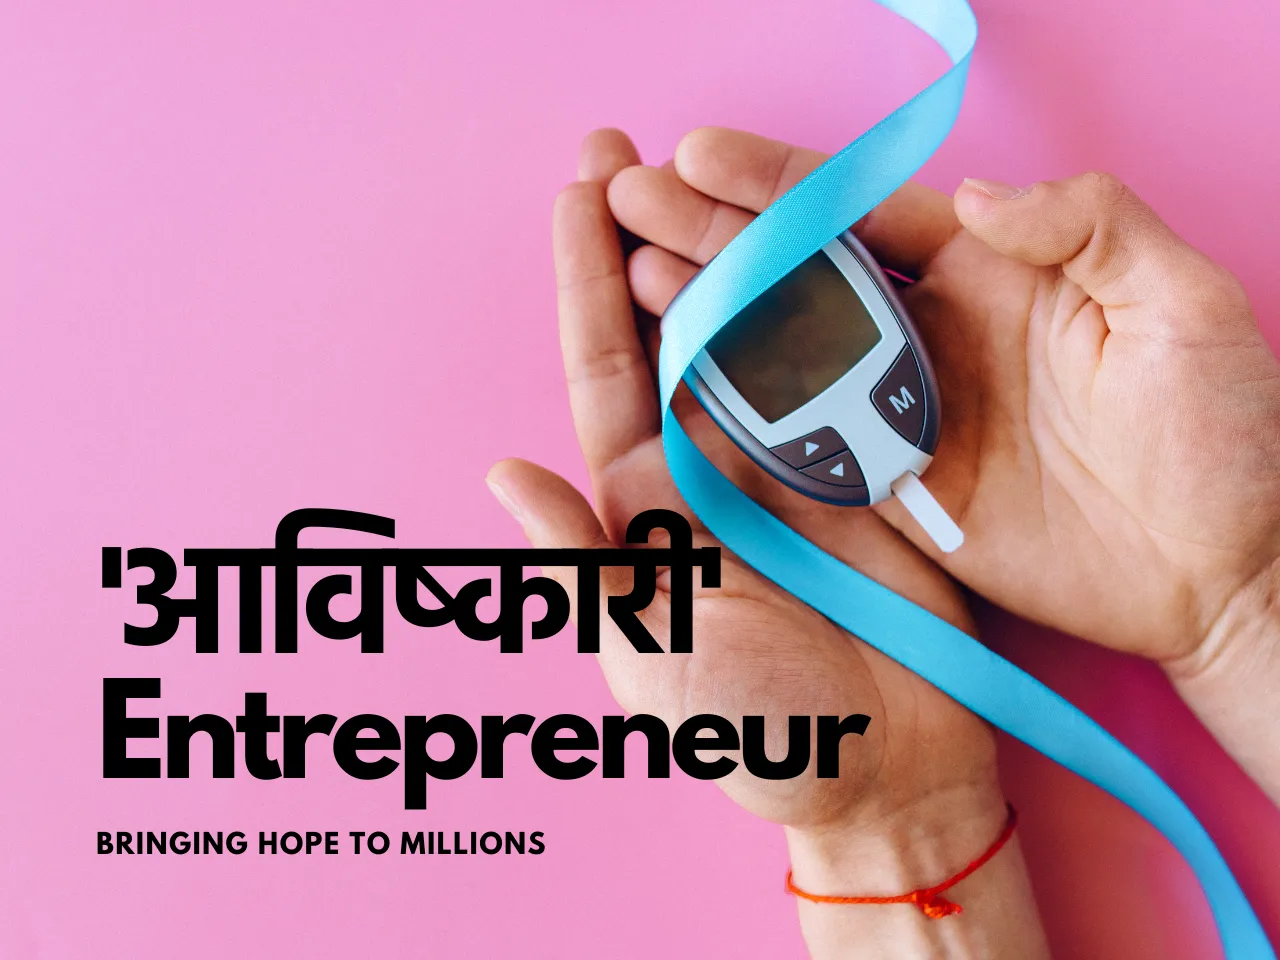 Breakthrough Diabetes Treatment from Hyderabad Startup!